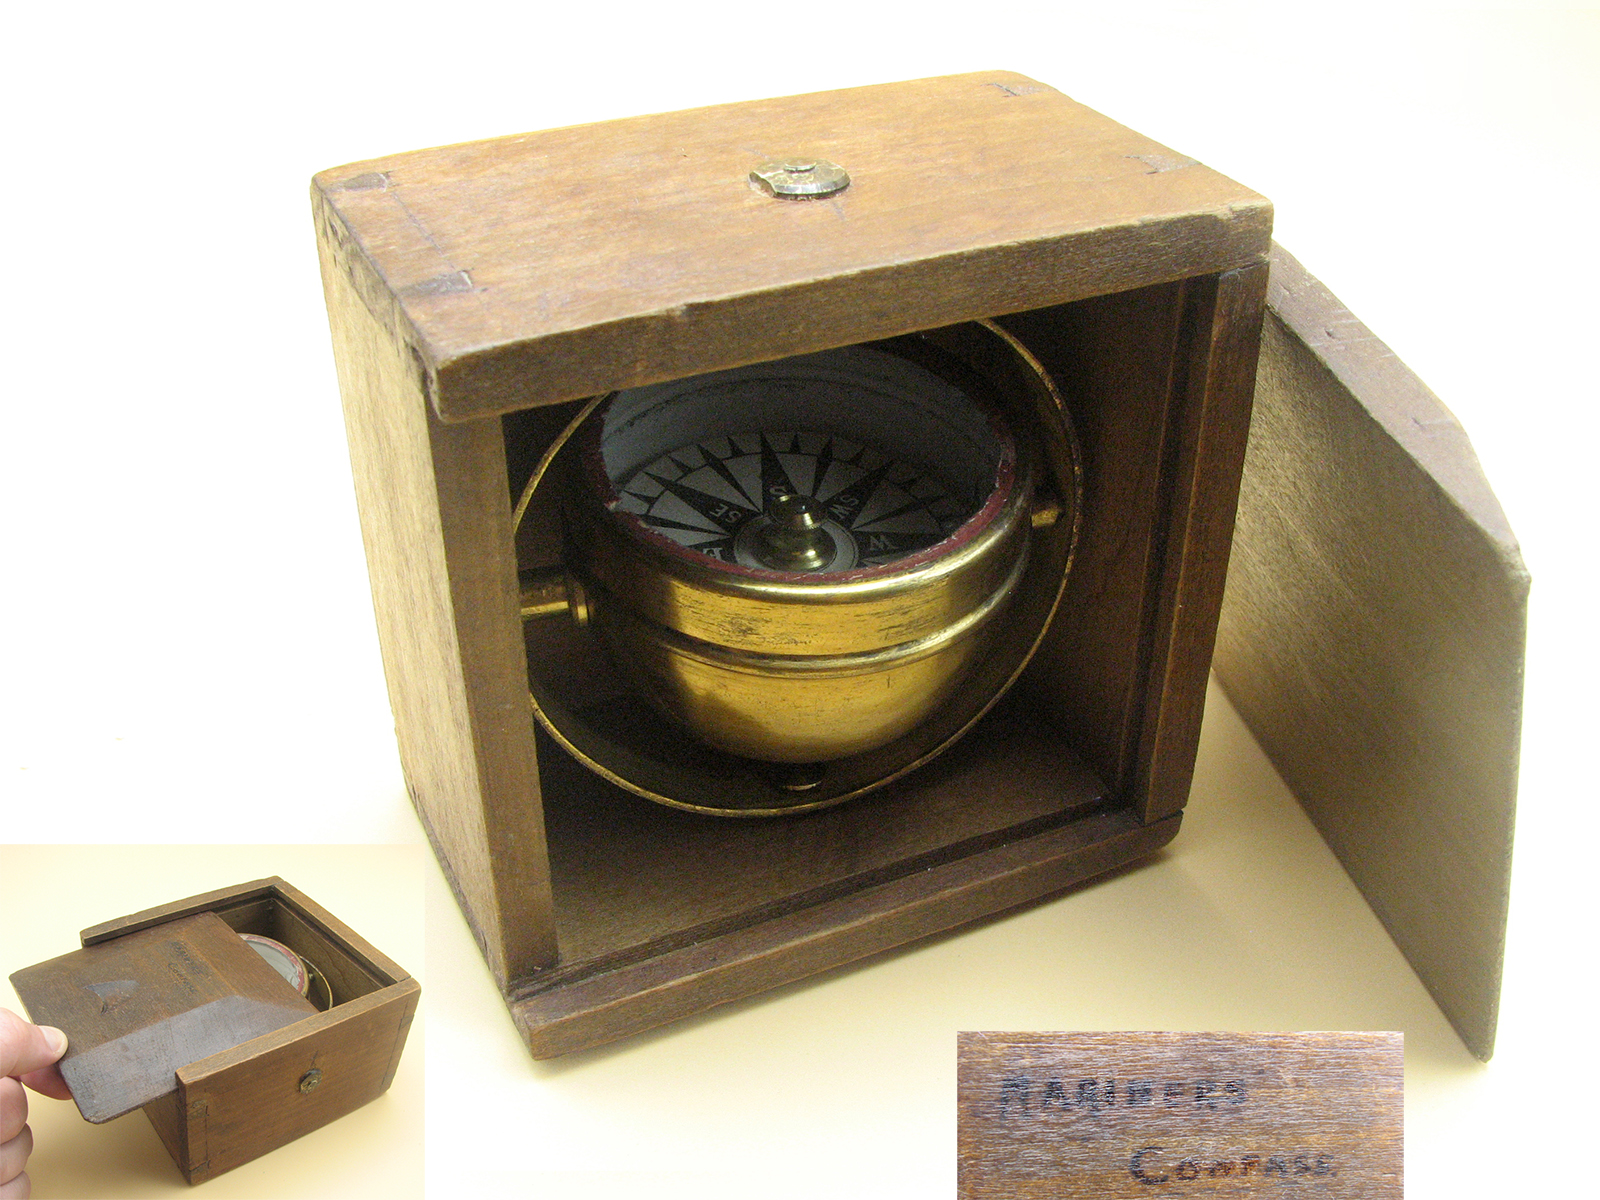 19th century ships gimbal mounted compass in mahogany case